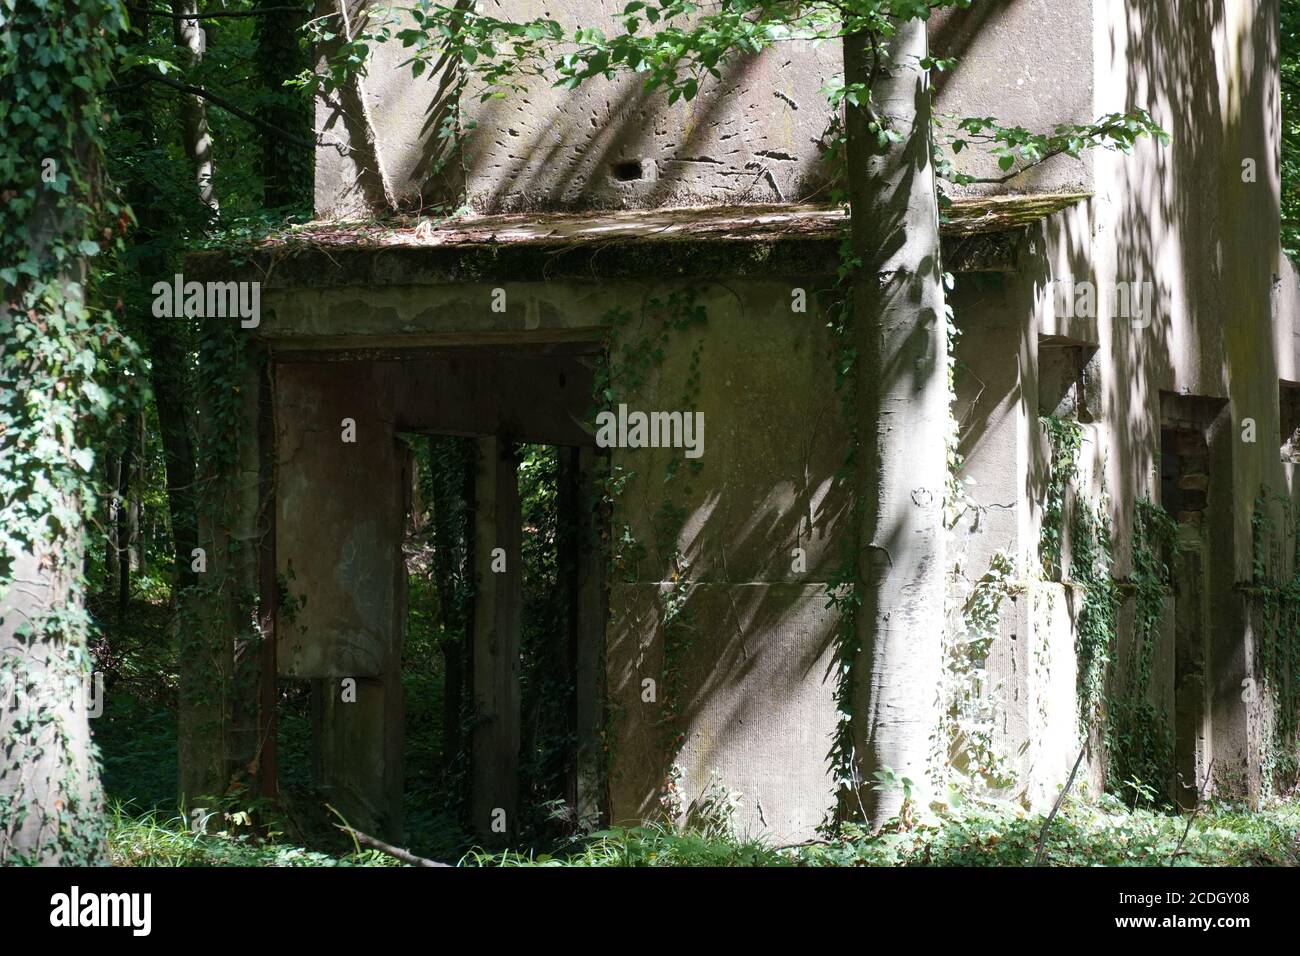 Ramshackle house in the forest with windows and doors taken out. There are only rundown walls left and they crumble slowly. Stock Photo